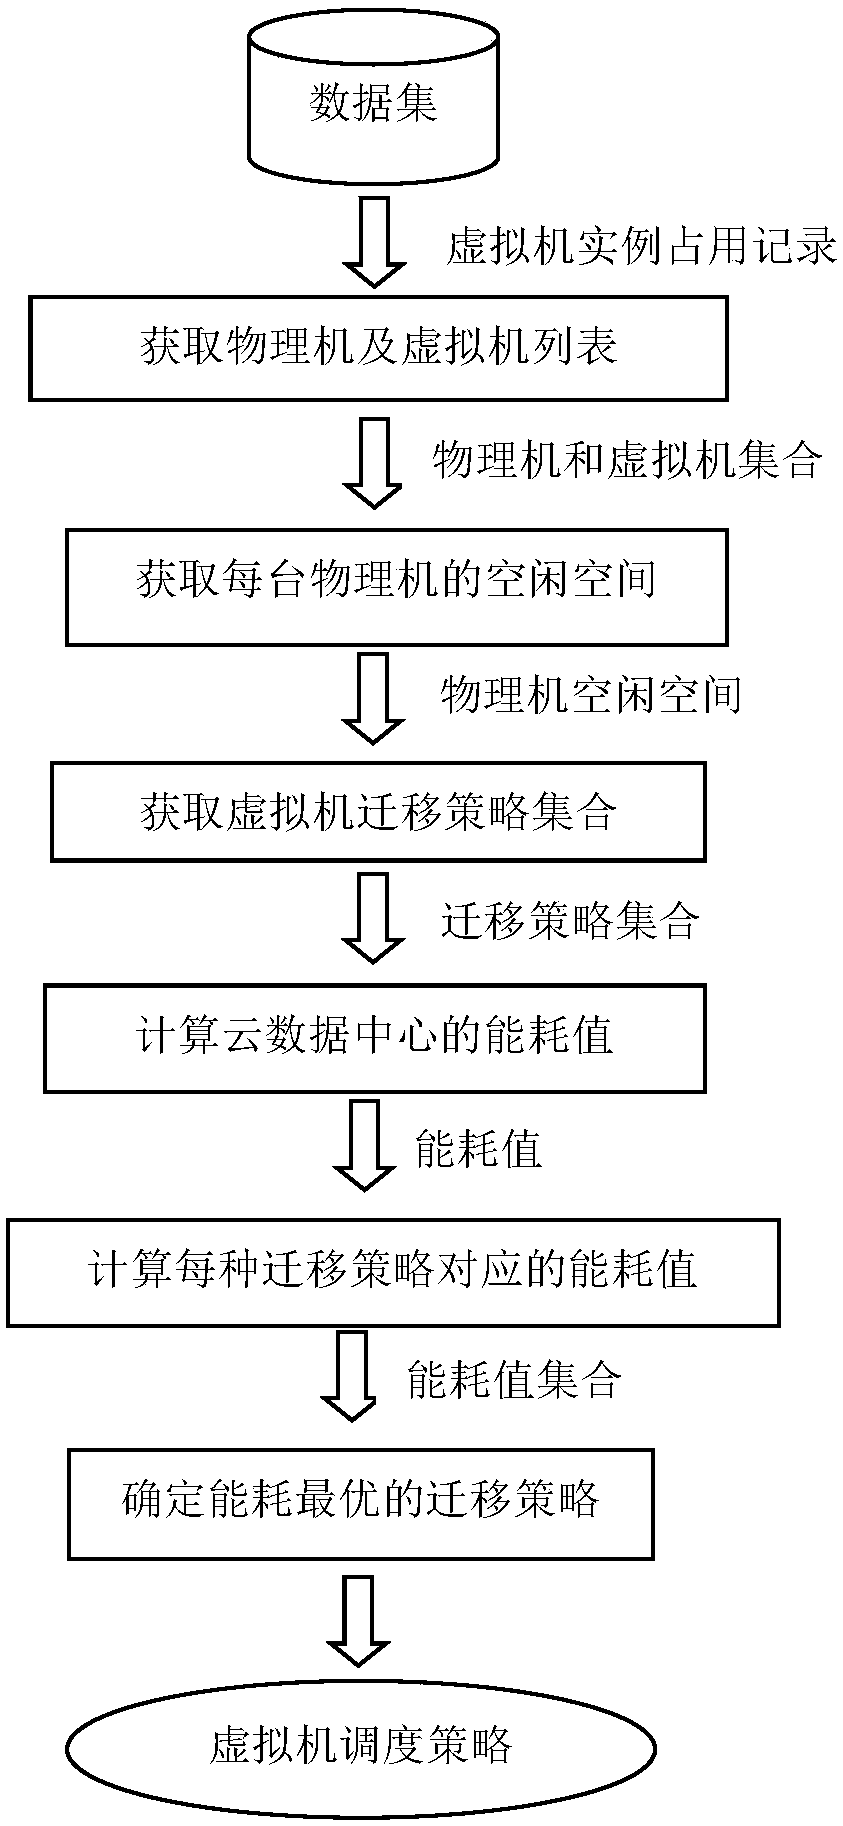 Virtual machine scheduling method for supporting energy consumption optimization of cloud data center